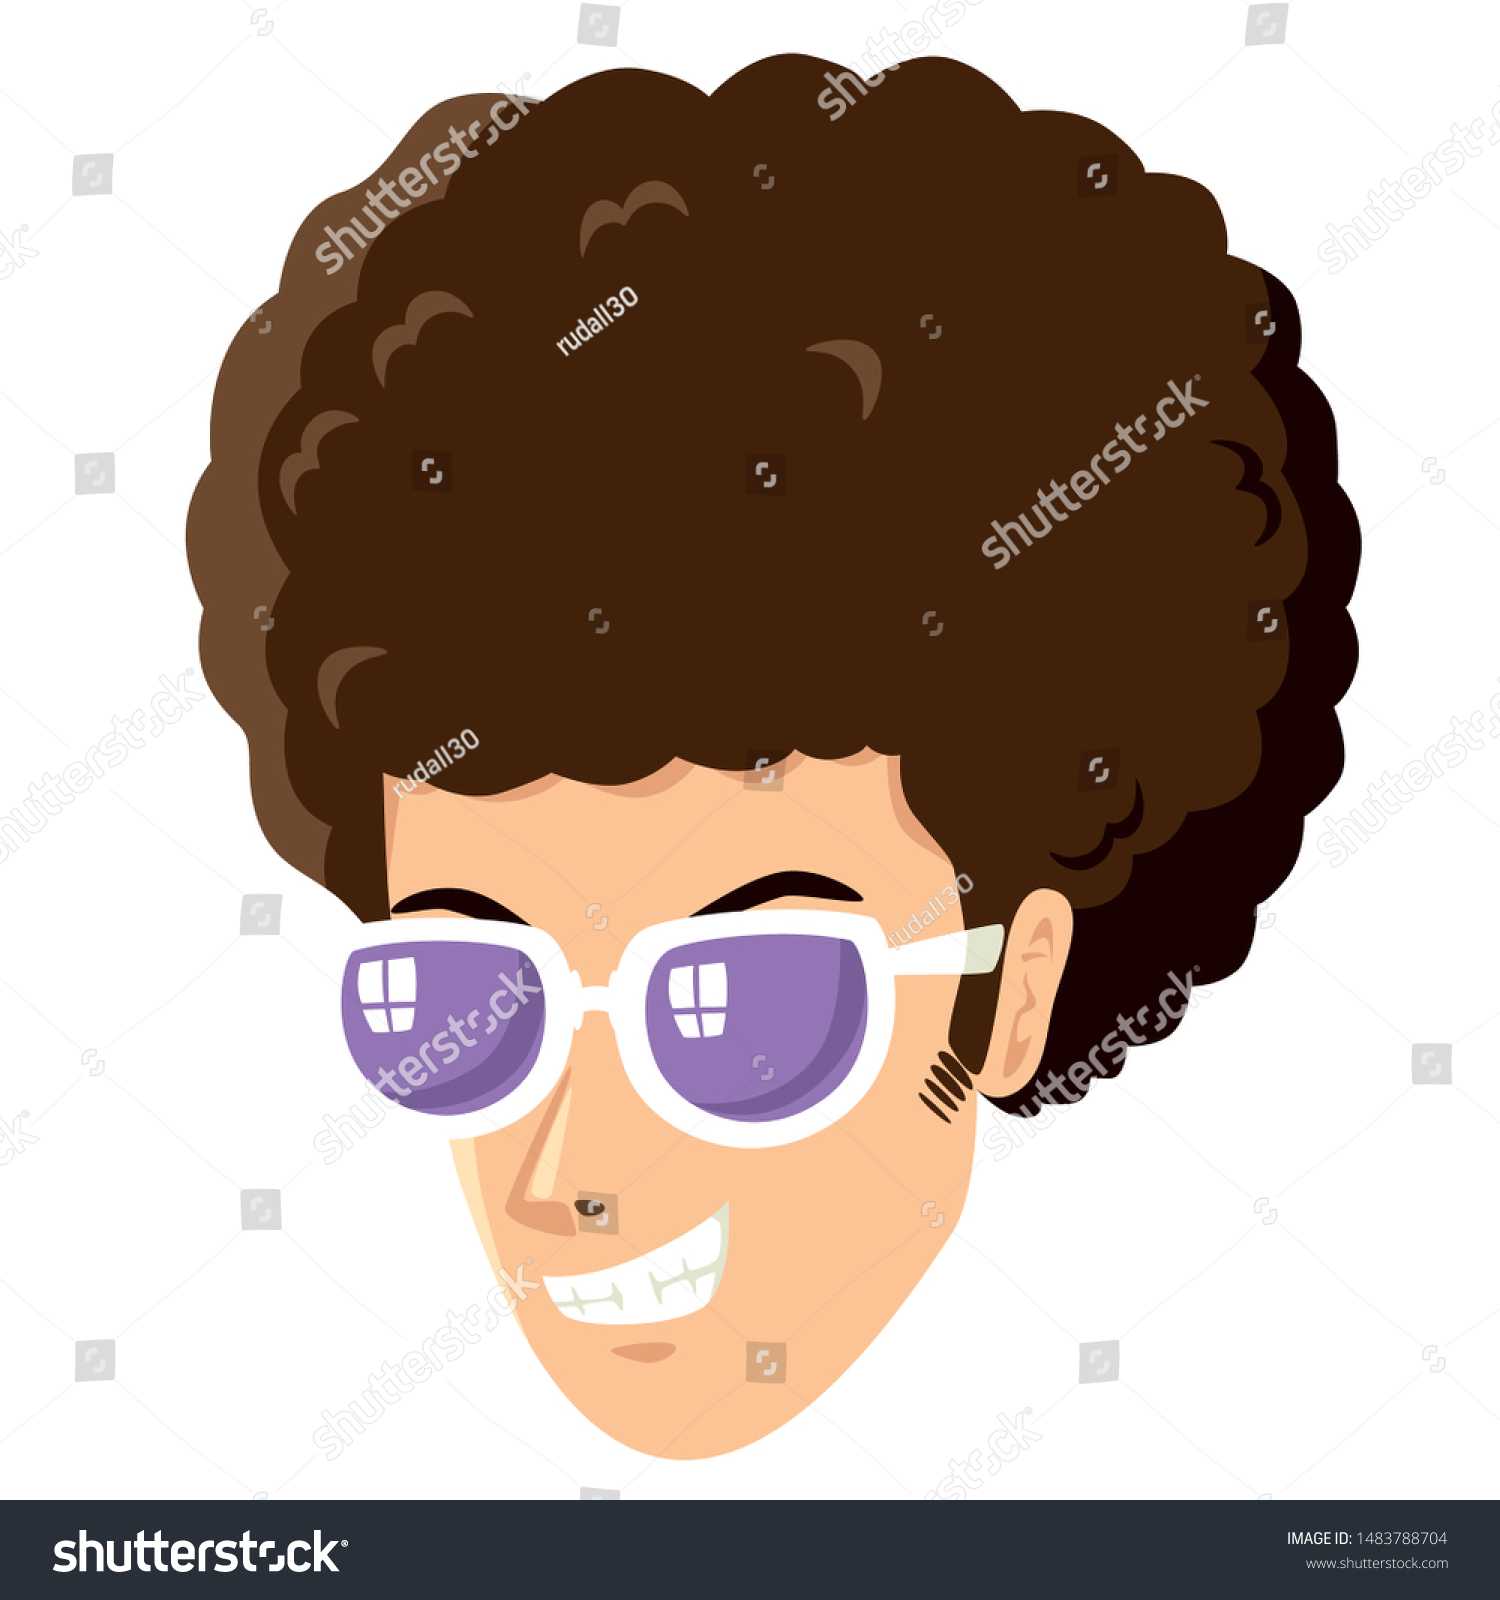 SVG of Simple flat vector illustration of man head with frizzy hairstyle. Cartoon profile picture. svg